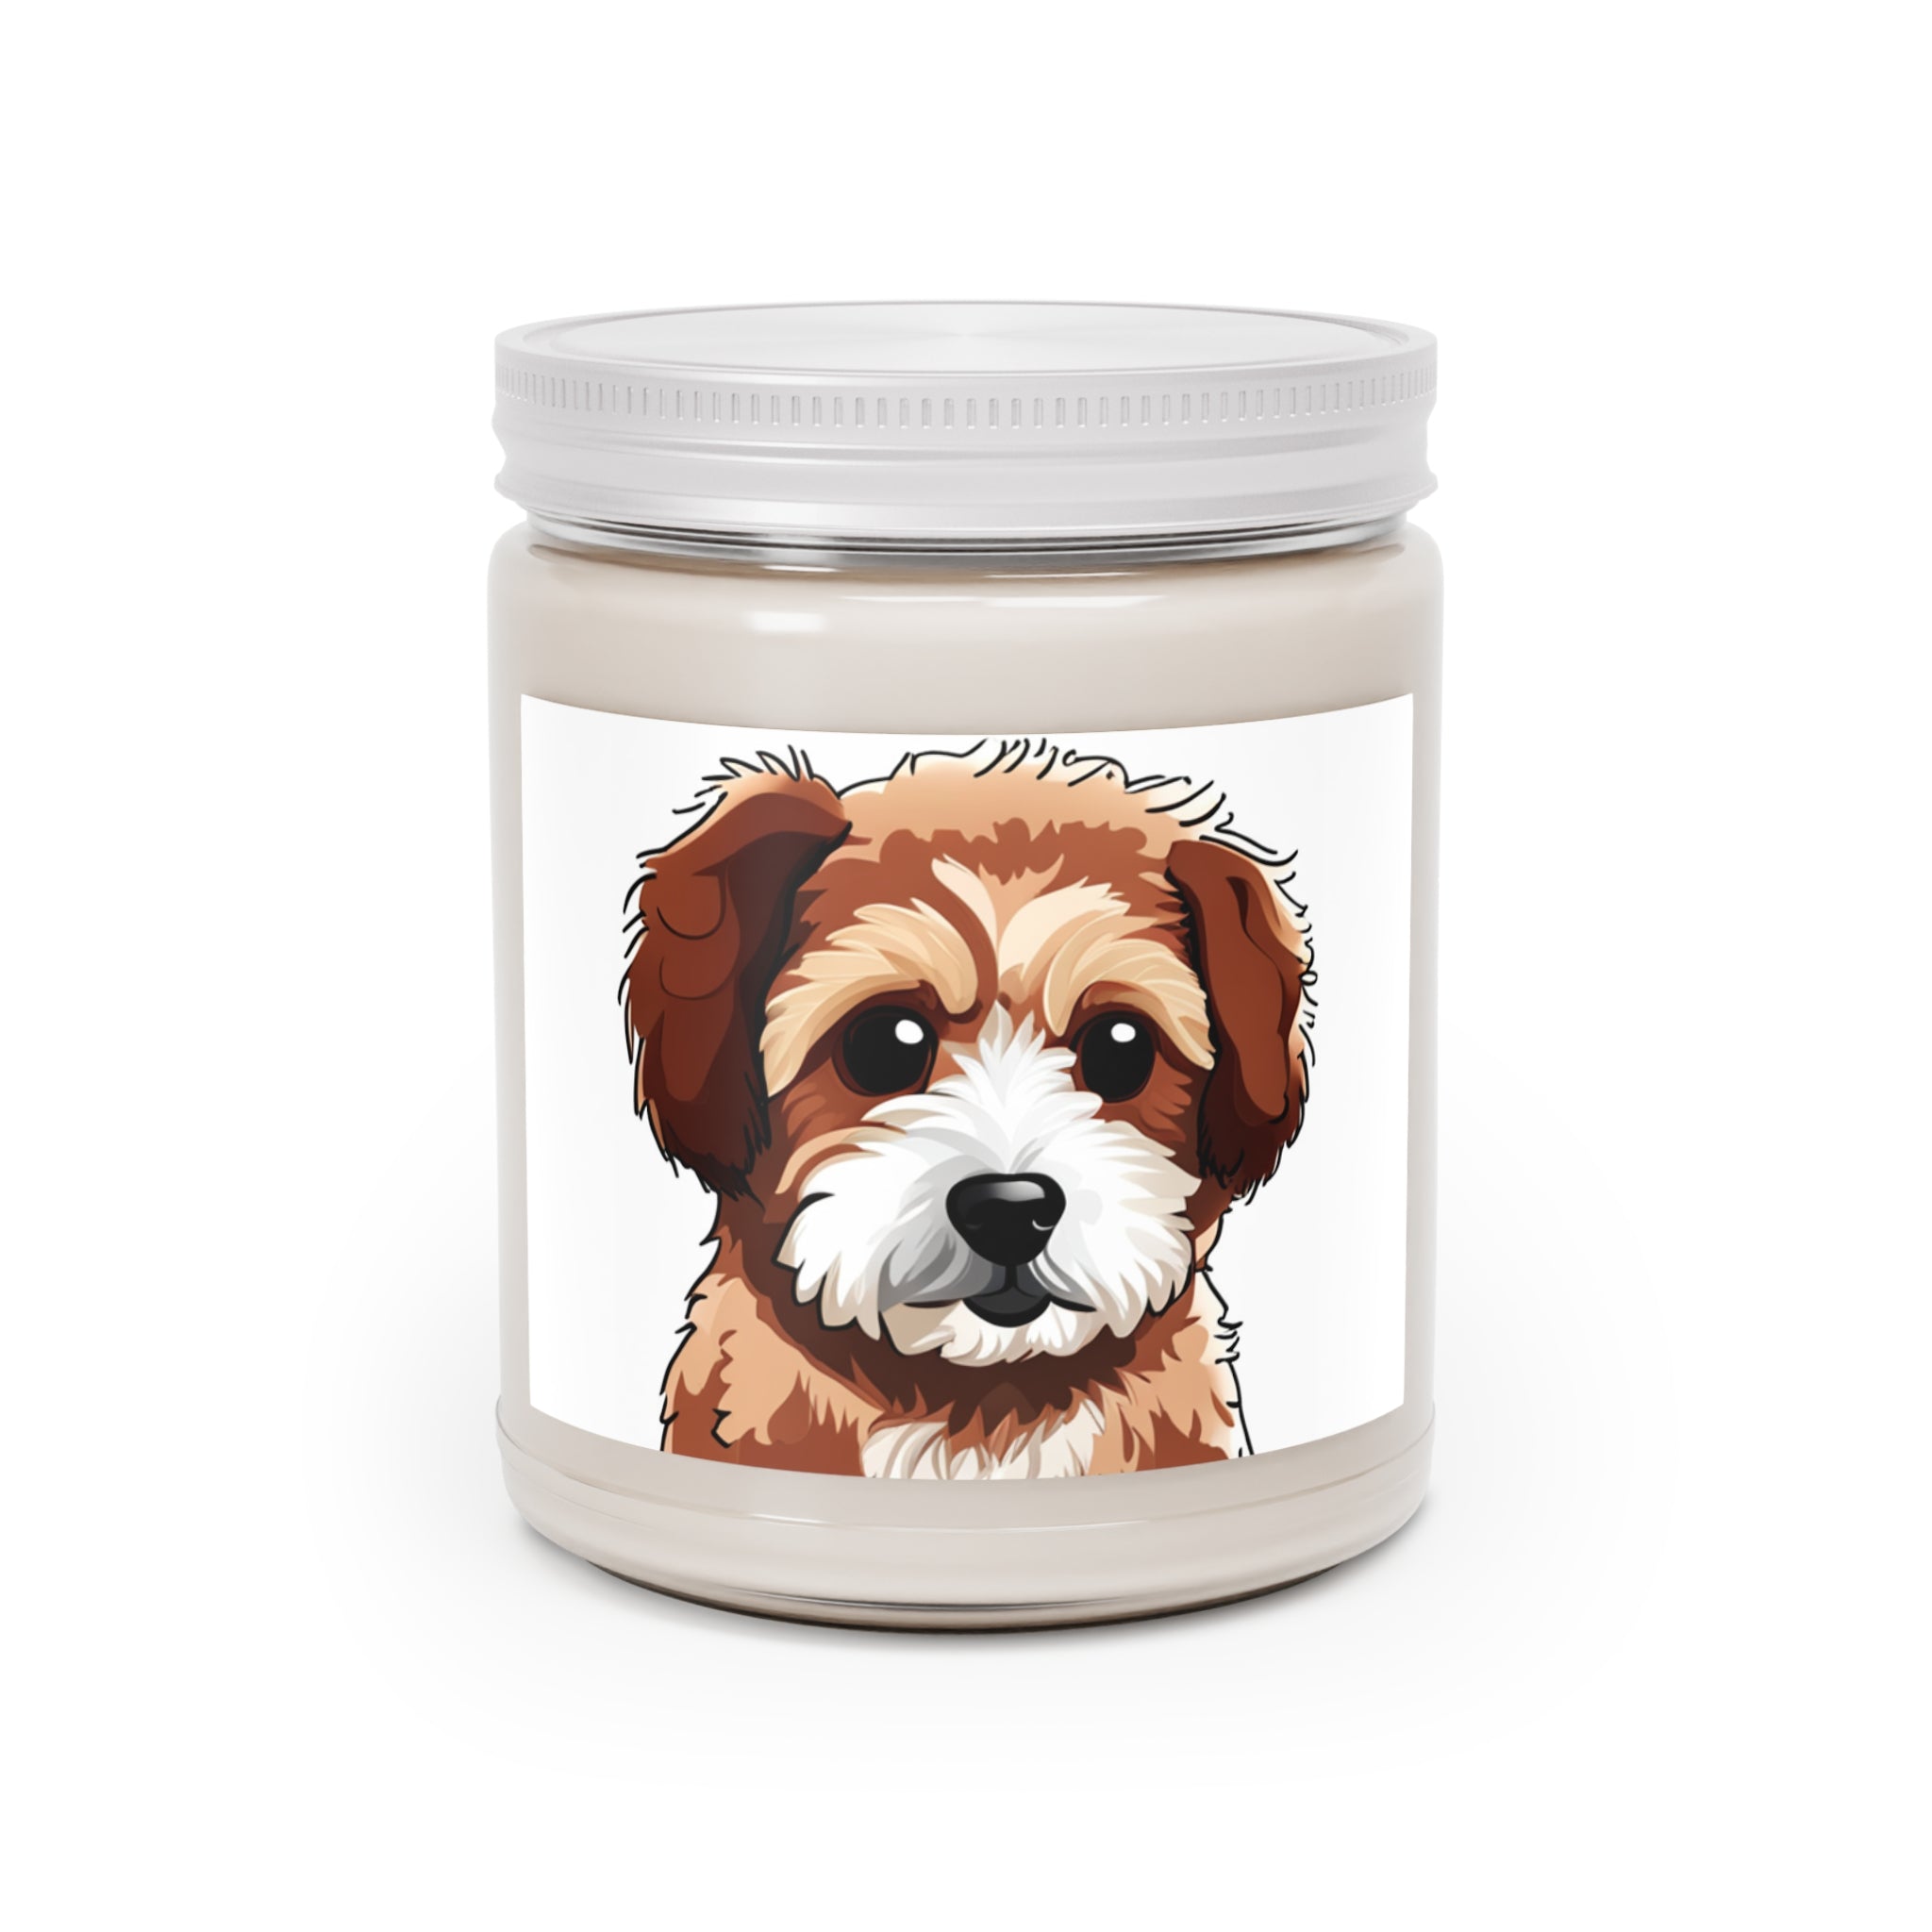 Cavoodle Themed Scented Candles, 255g